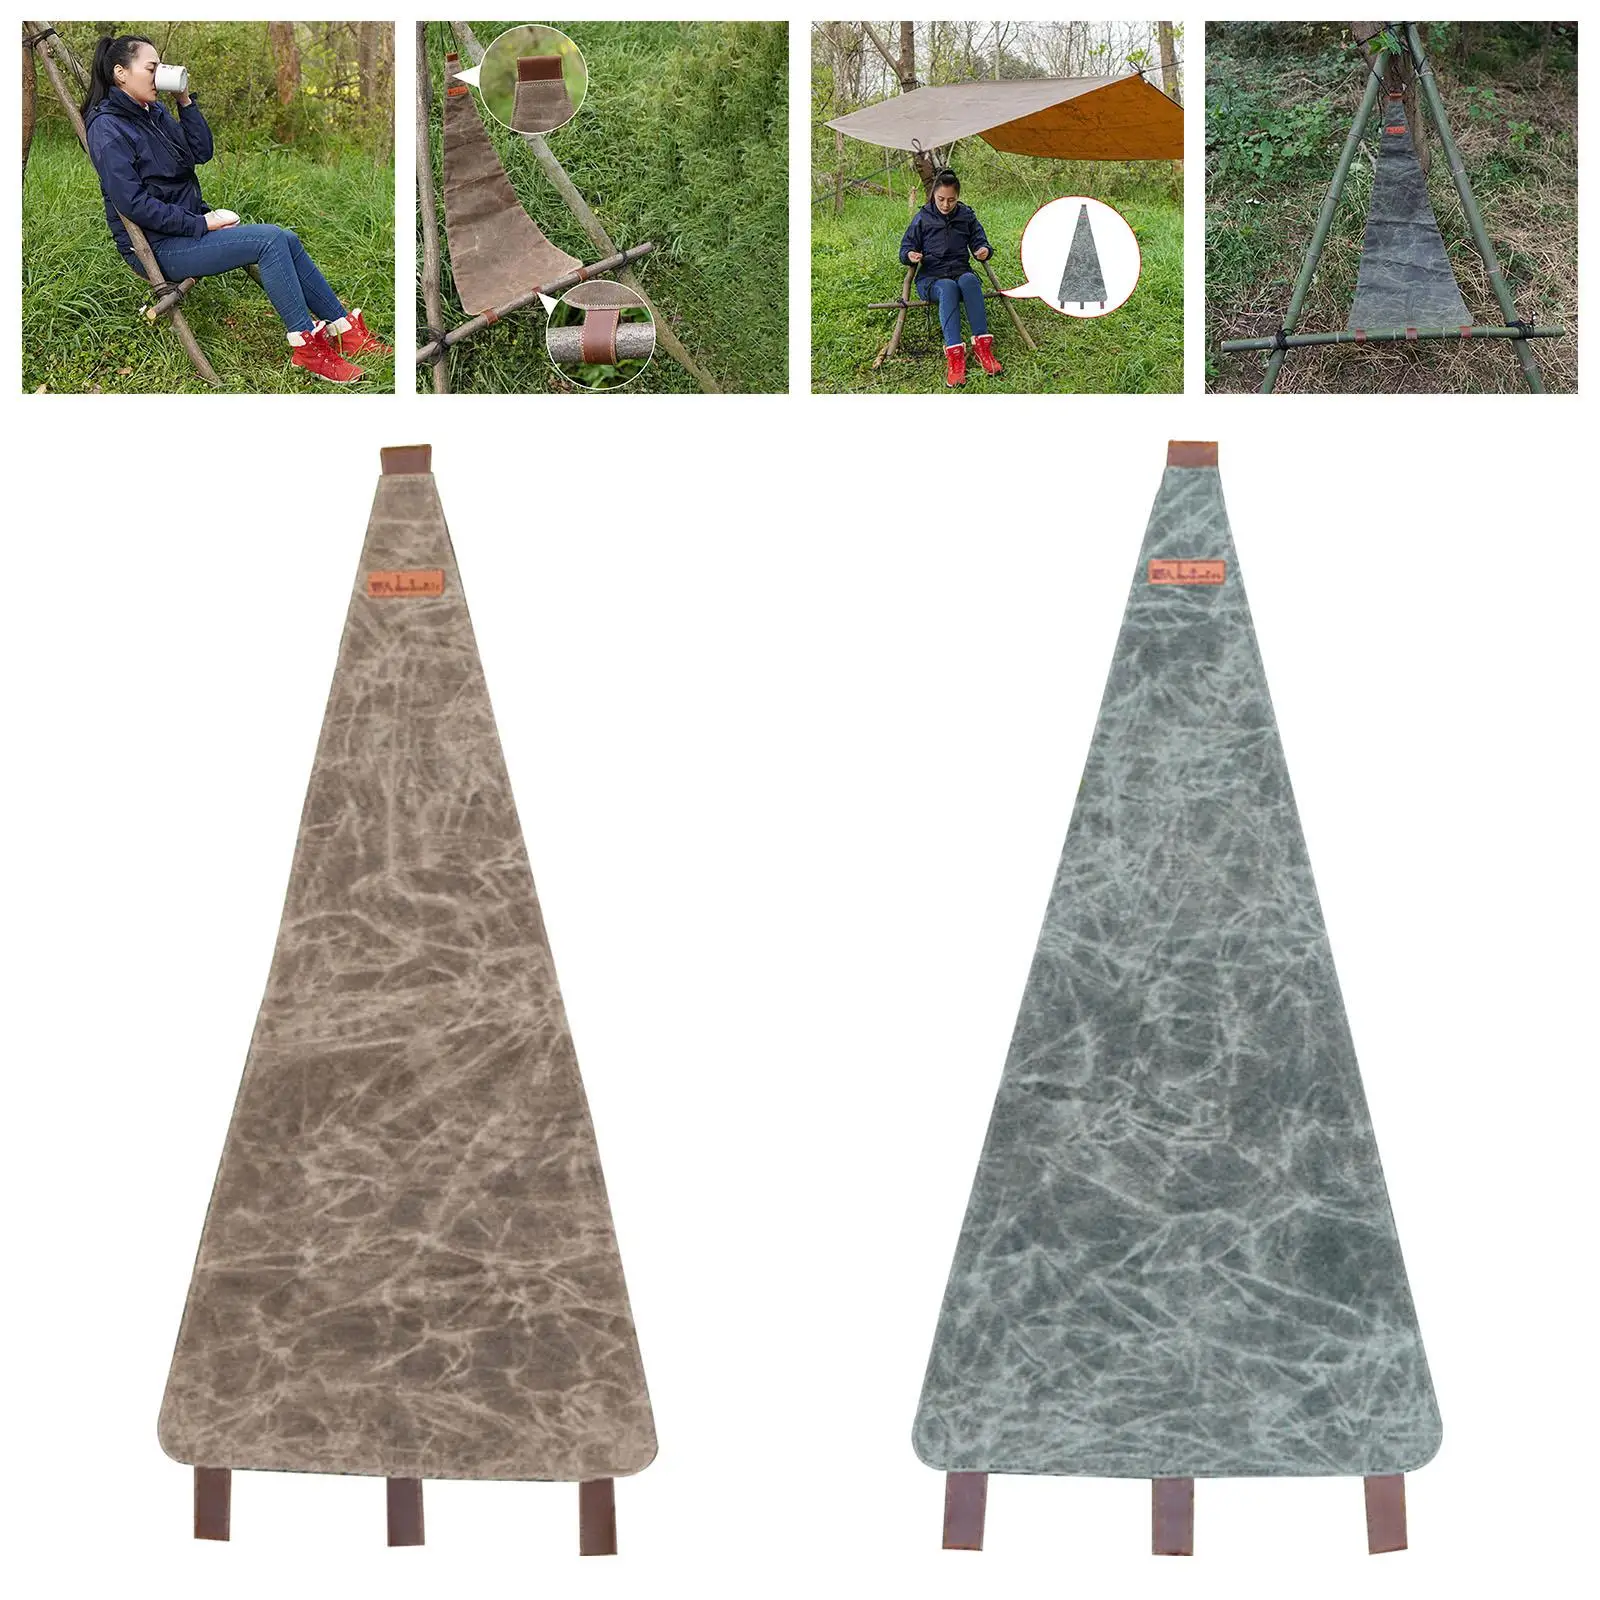 Folding Tripod  Cloth, Portable Stable Camping  Tri-Leg Stool for outdoor Fishing Hiking Mountaineering Gardening